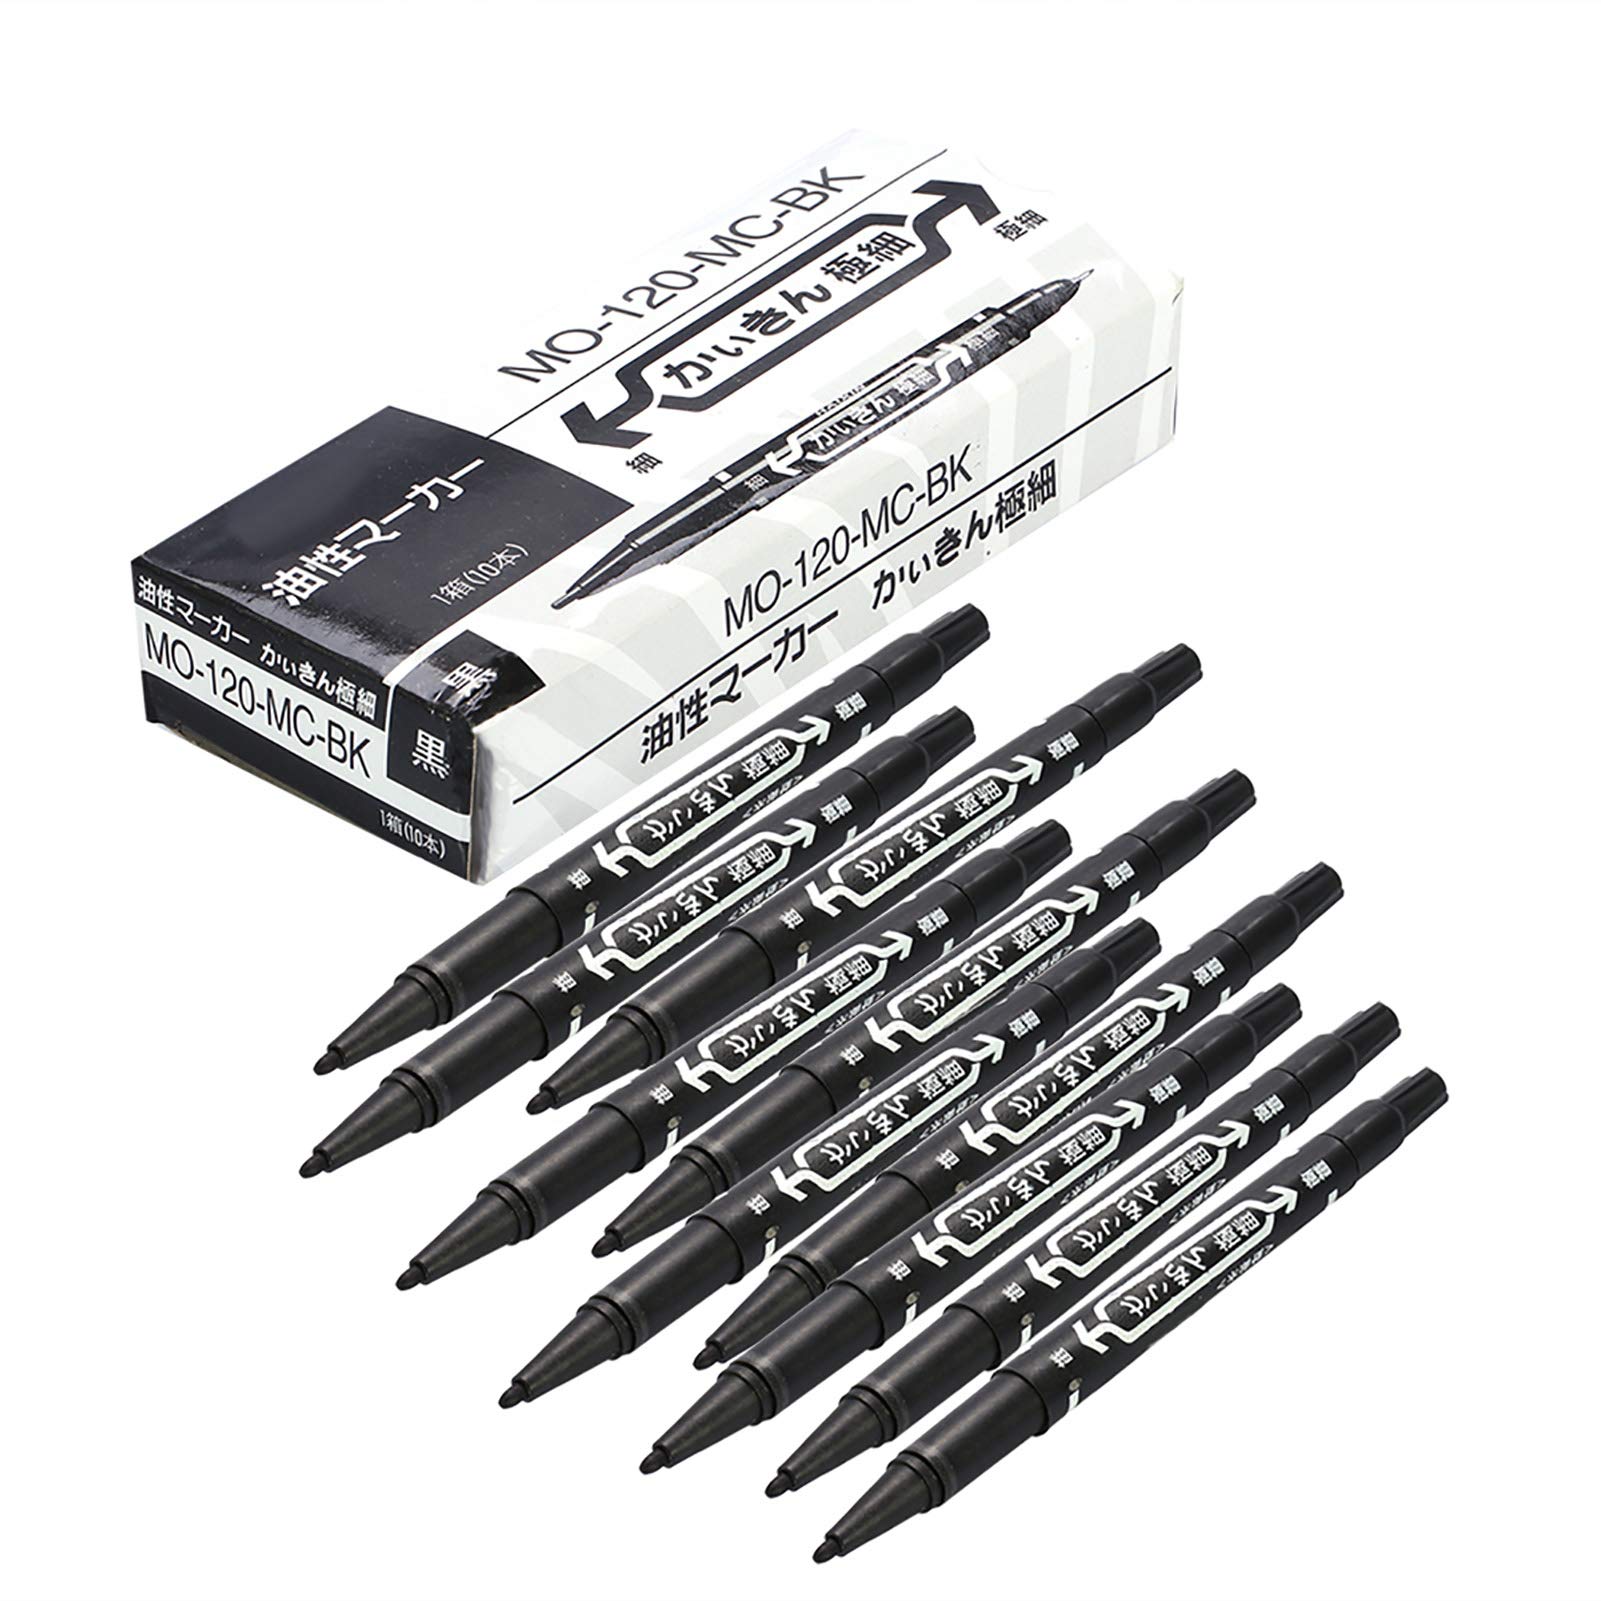 Tattoo Marker Pen 10 Pieces Body Marker Pens Black Bodymark Temporary  Tattoo Marker Dual Tips Skin Markers For Tattooing